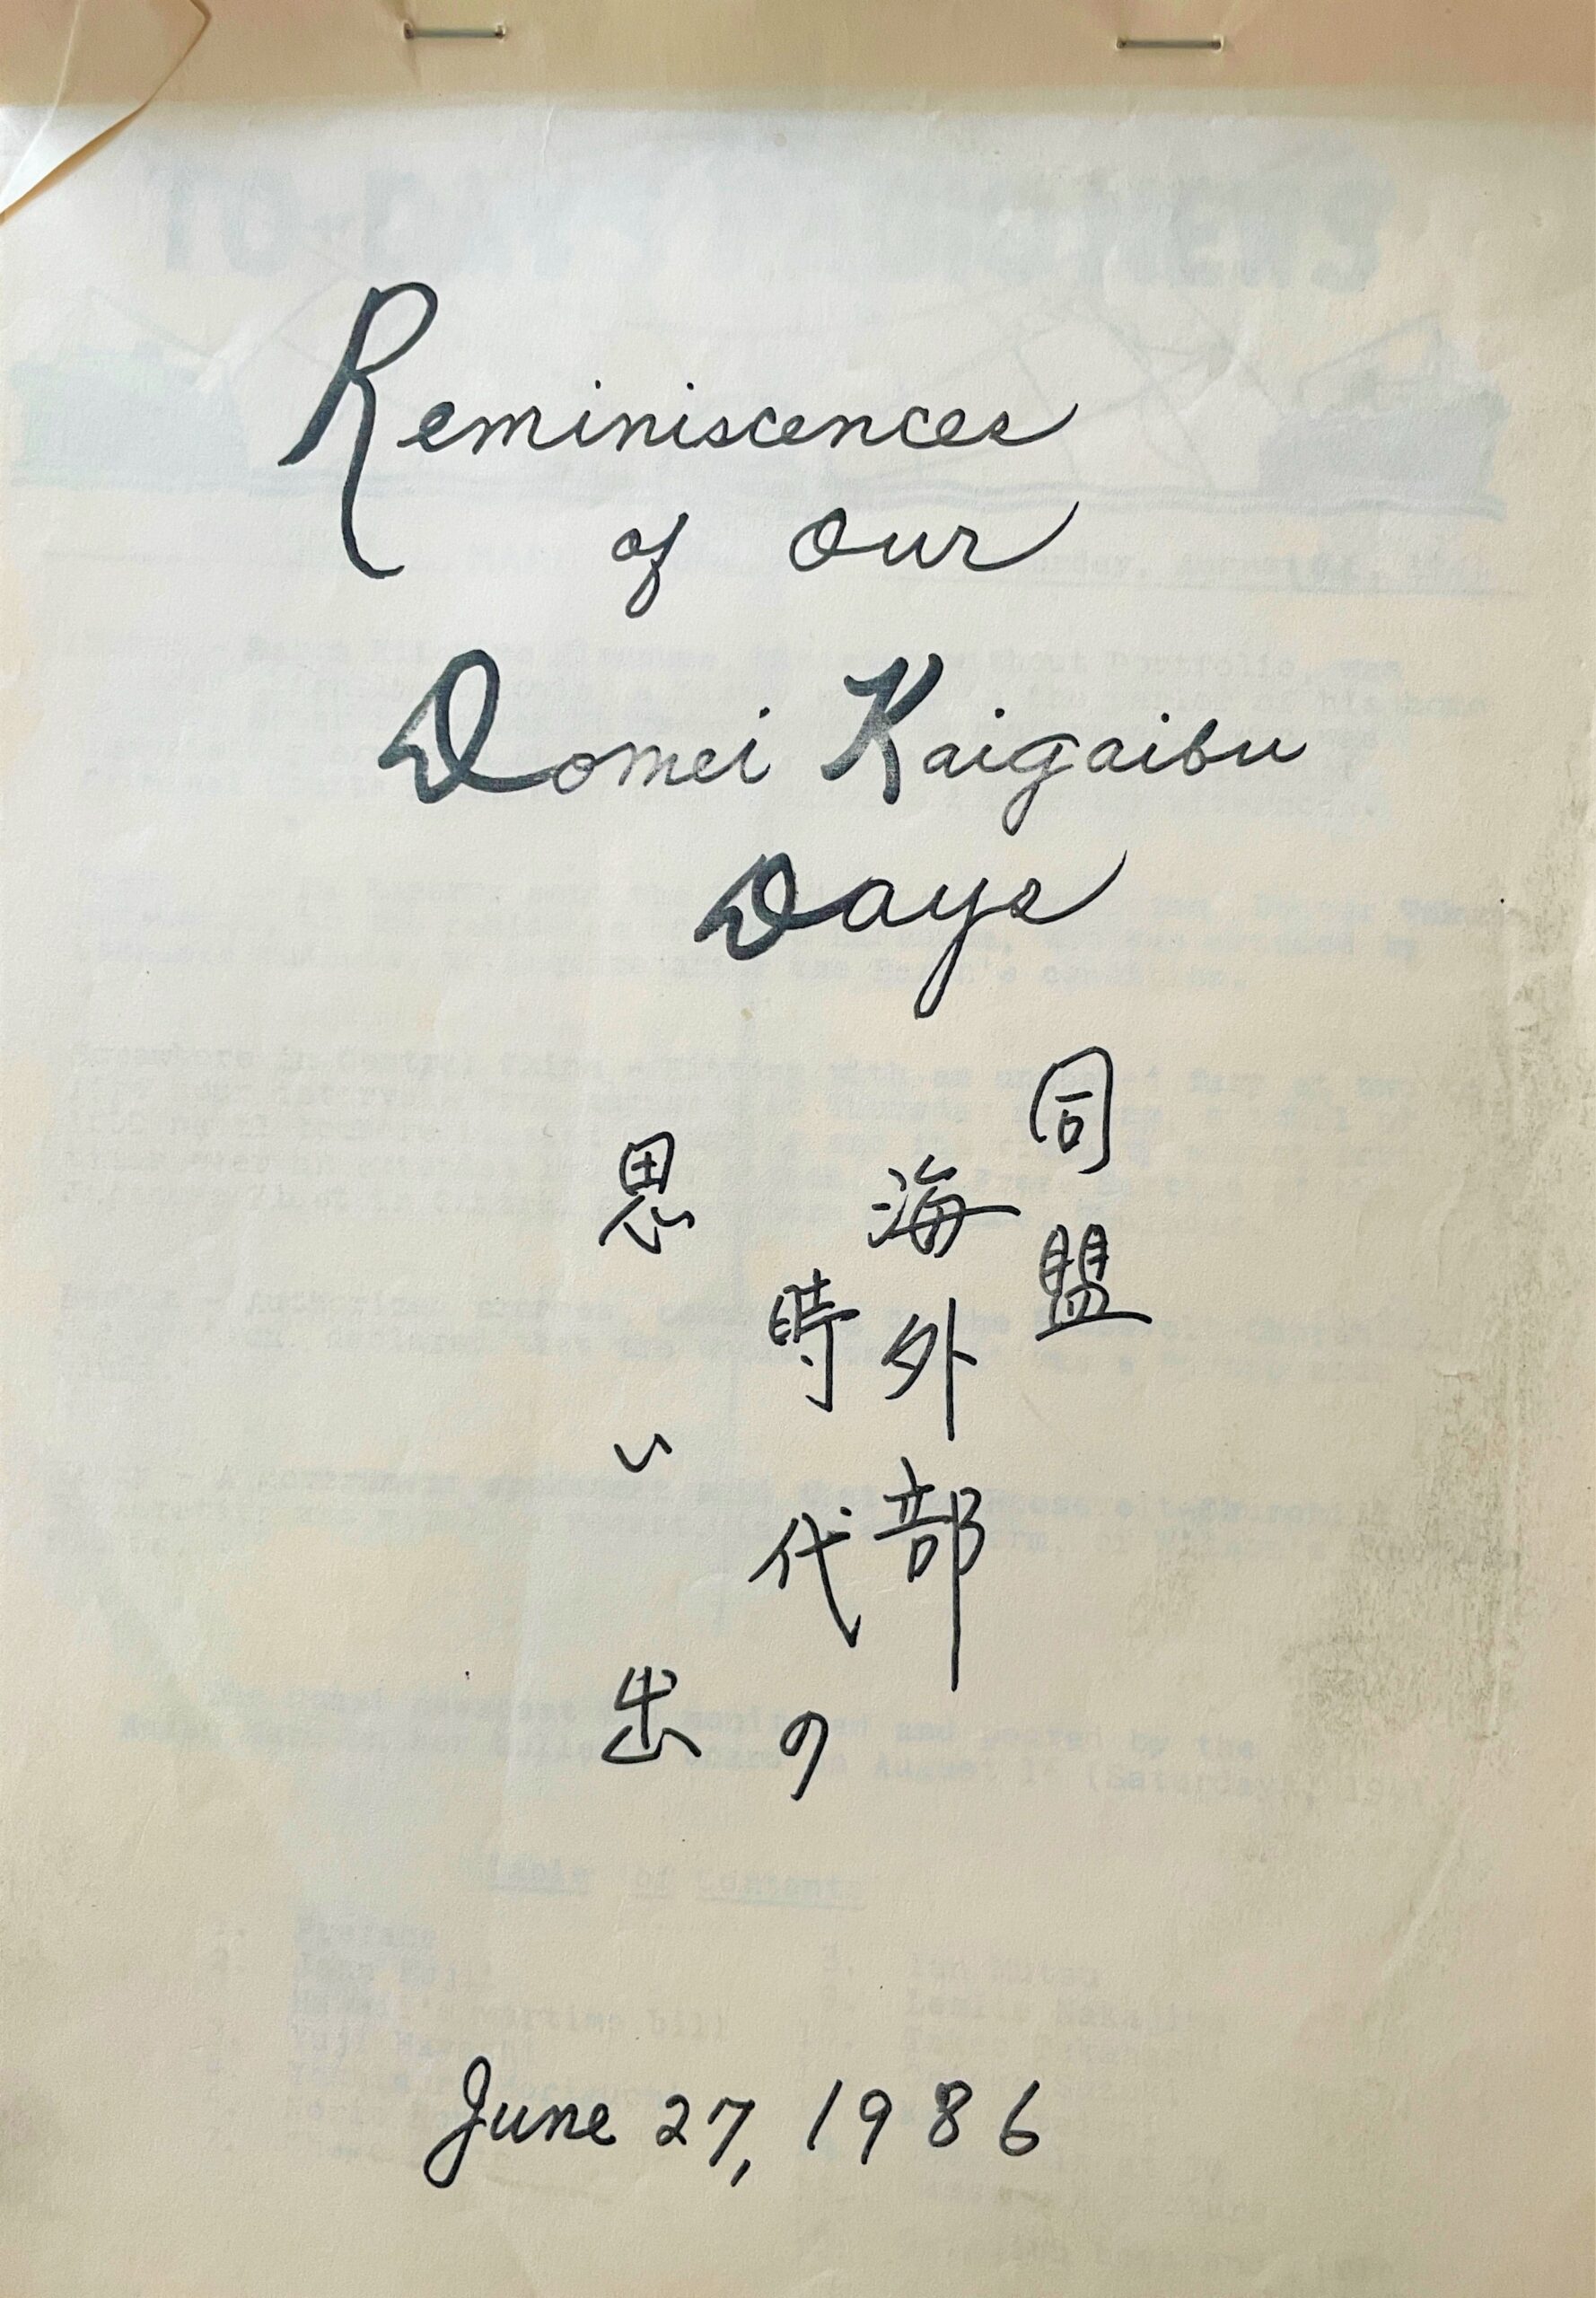 Title page of the Reunion Newsletter reading "Reminiscences of our Domei Kaigaibu Days" 同盟海外部時代の思い出　June 27, 1986